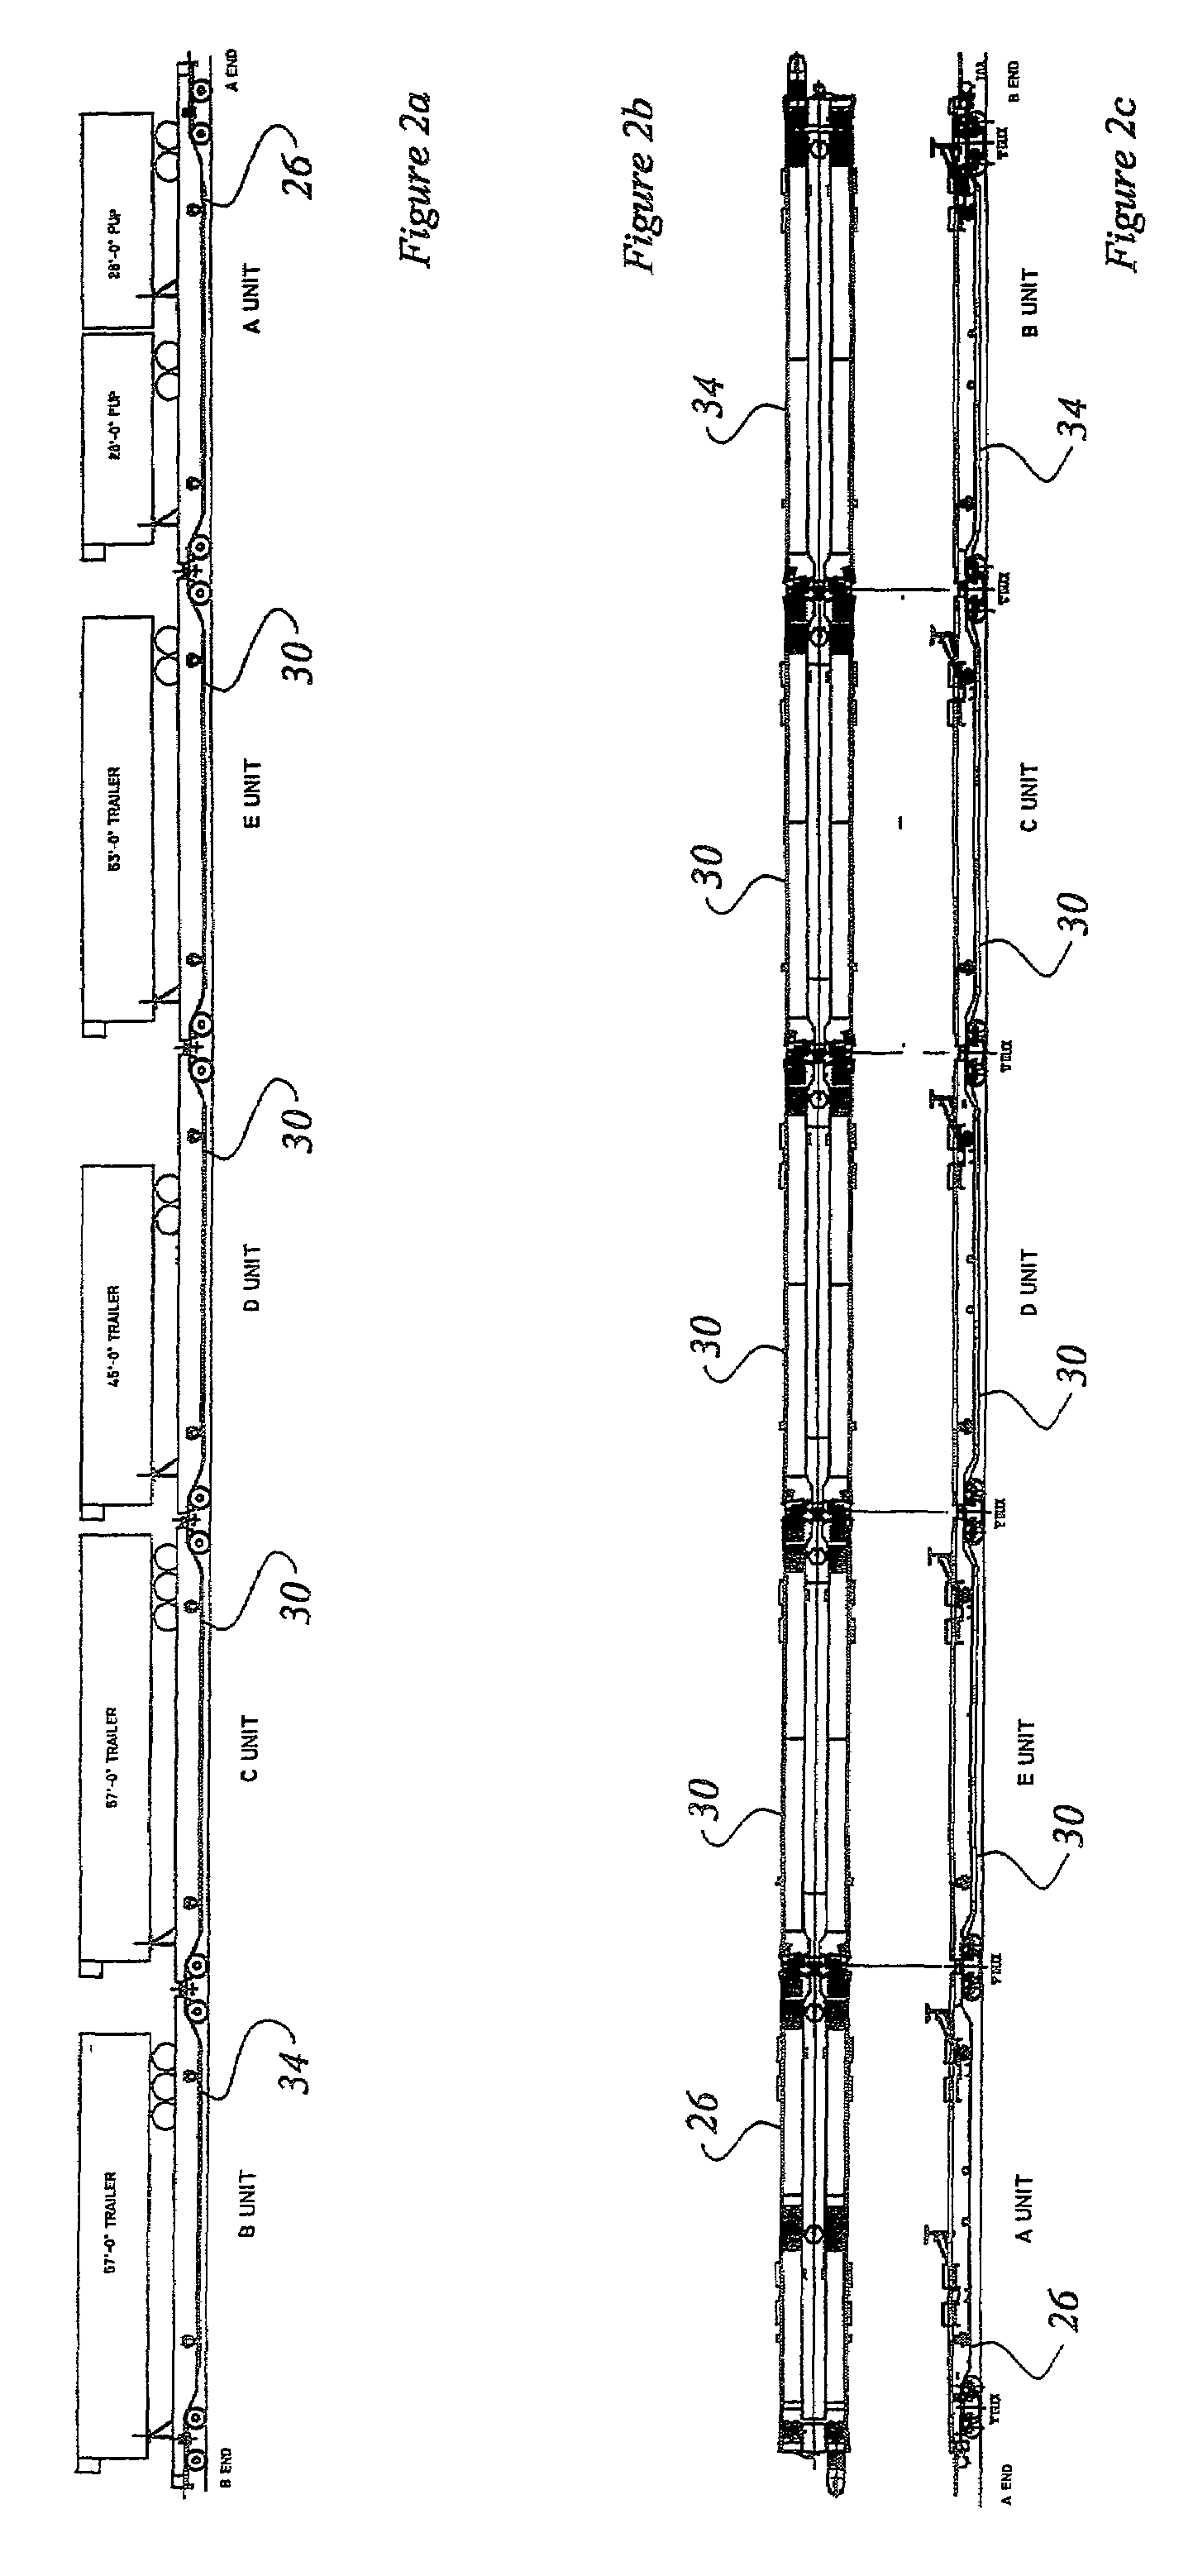 Vehicle carrying rail road car and bridge plate therefor